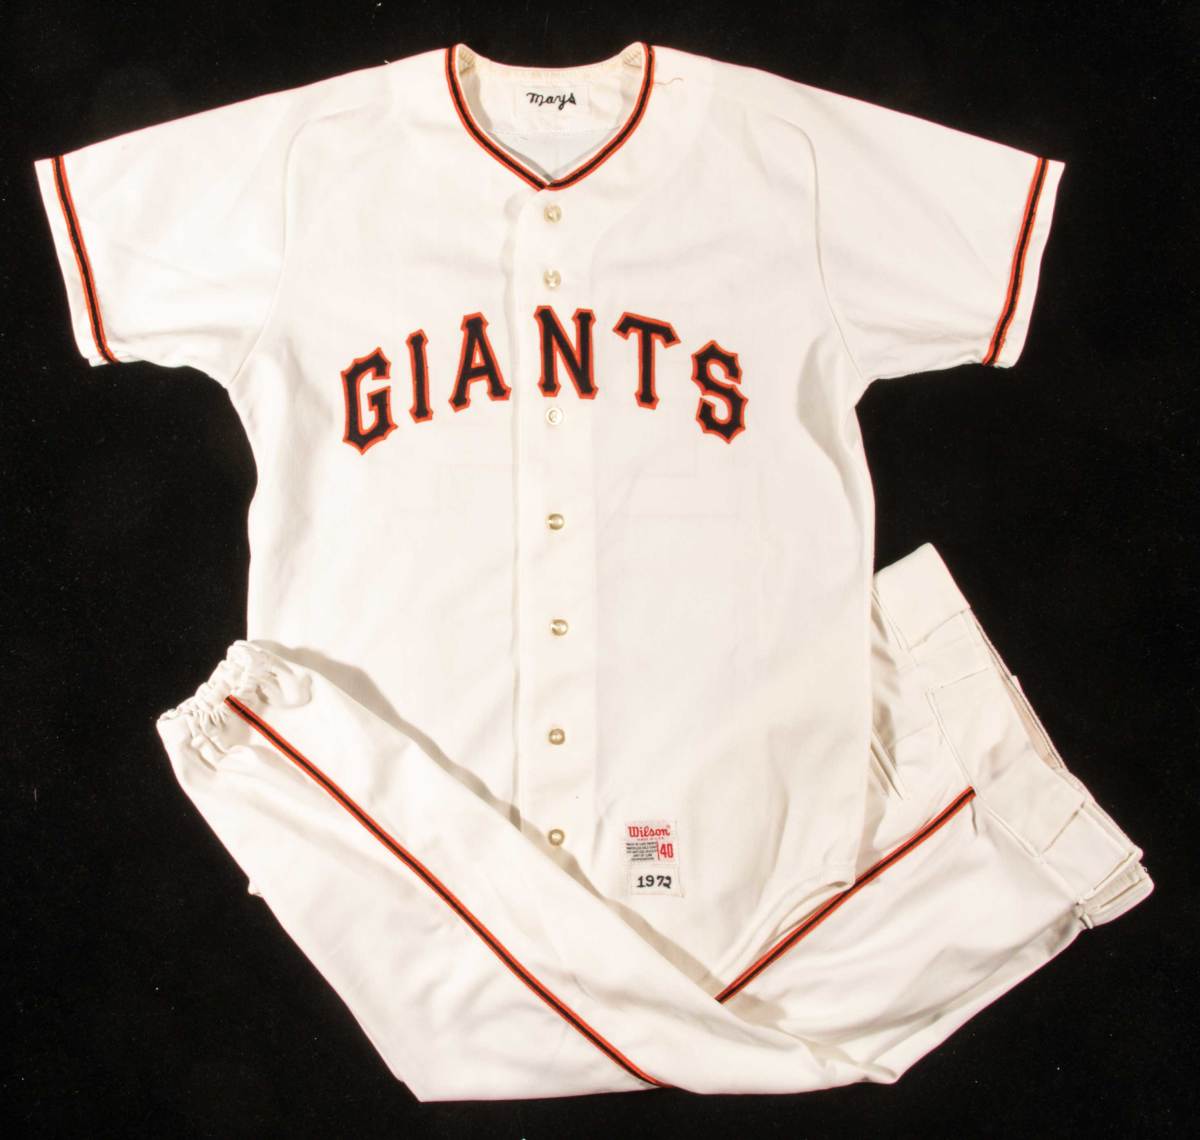 1972 Willie Mays home jersey.